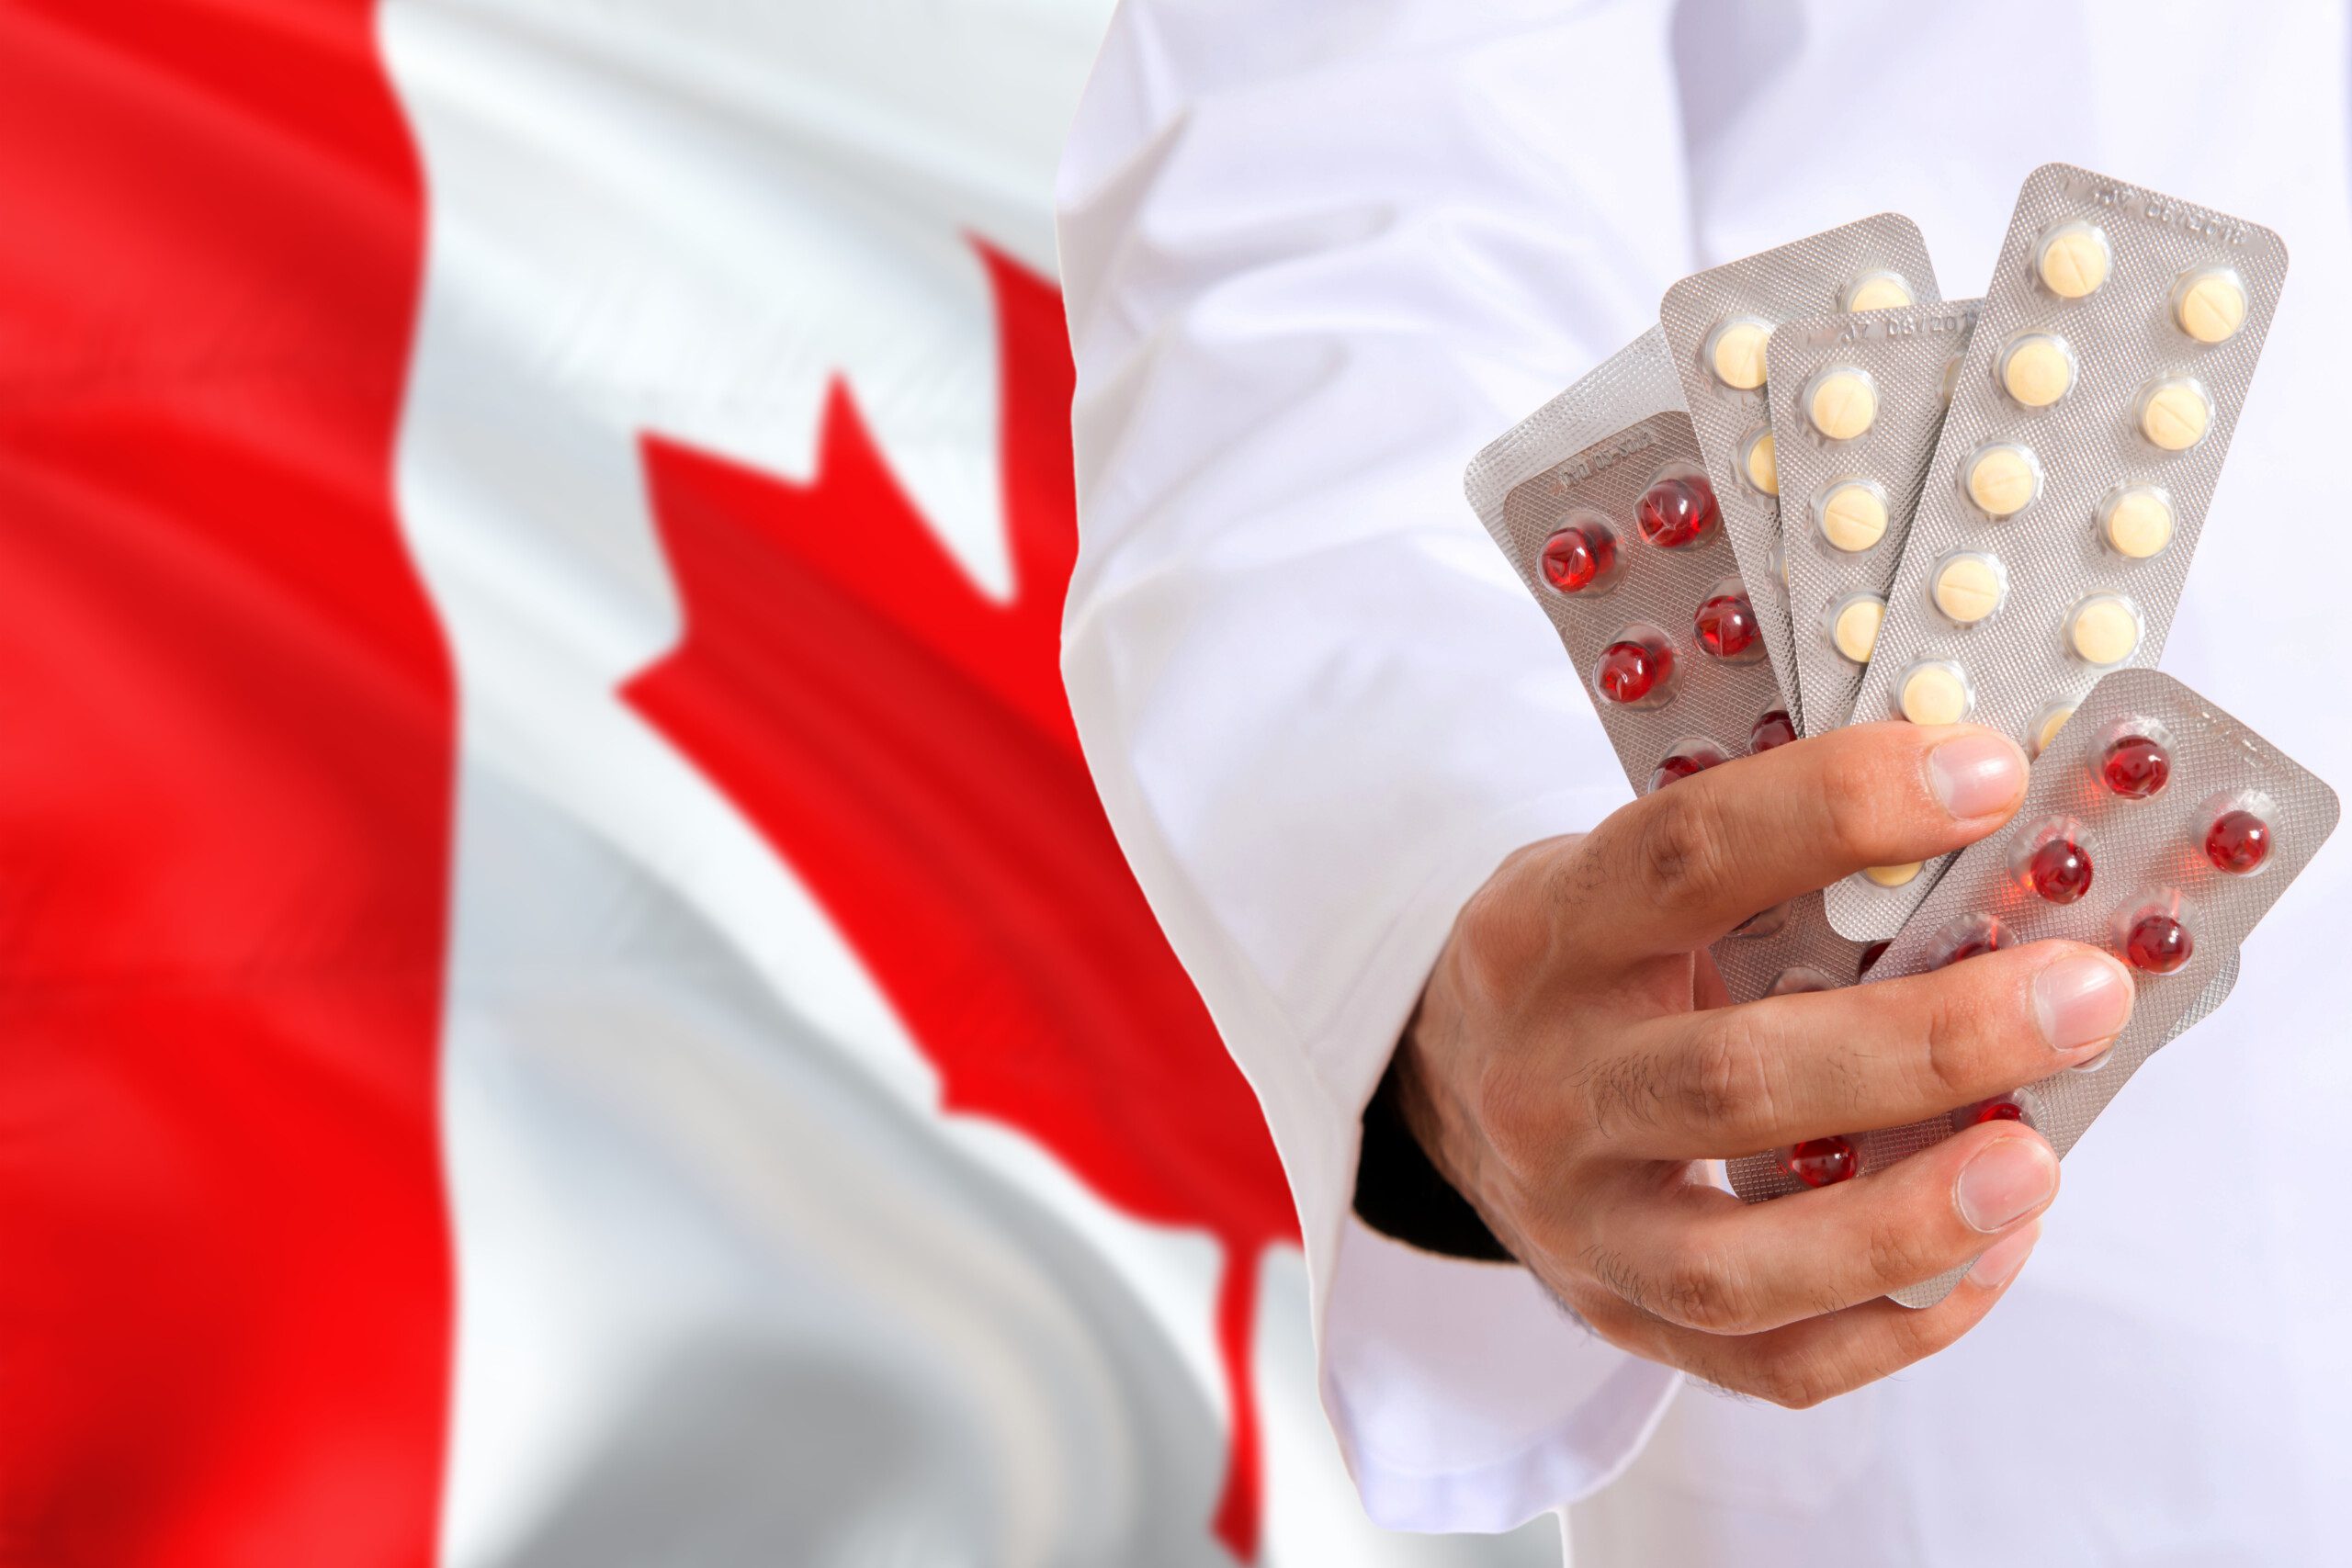 Buying Prescription Drugs from Canada is Now Legal in Florida